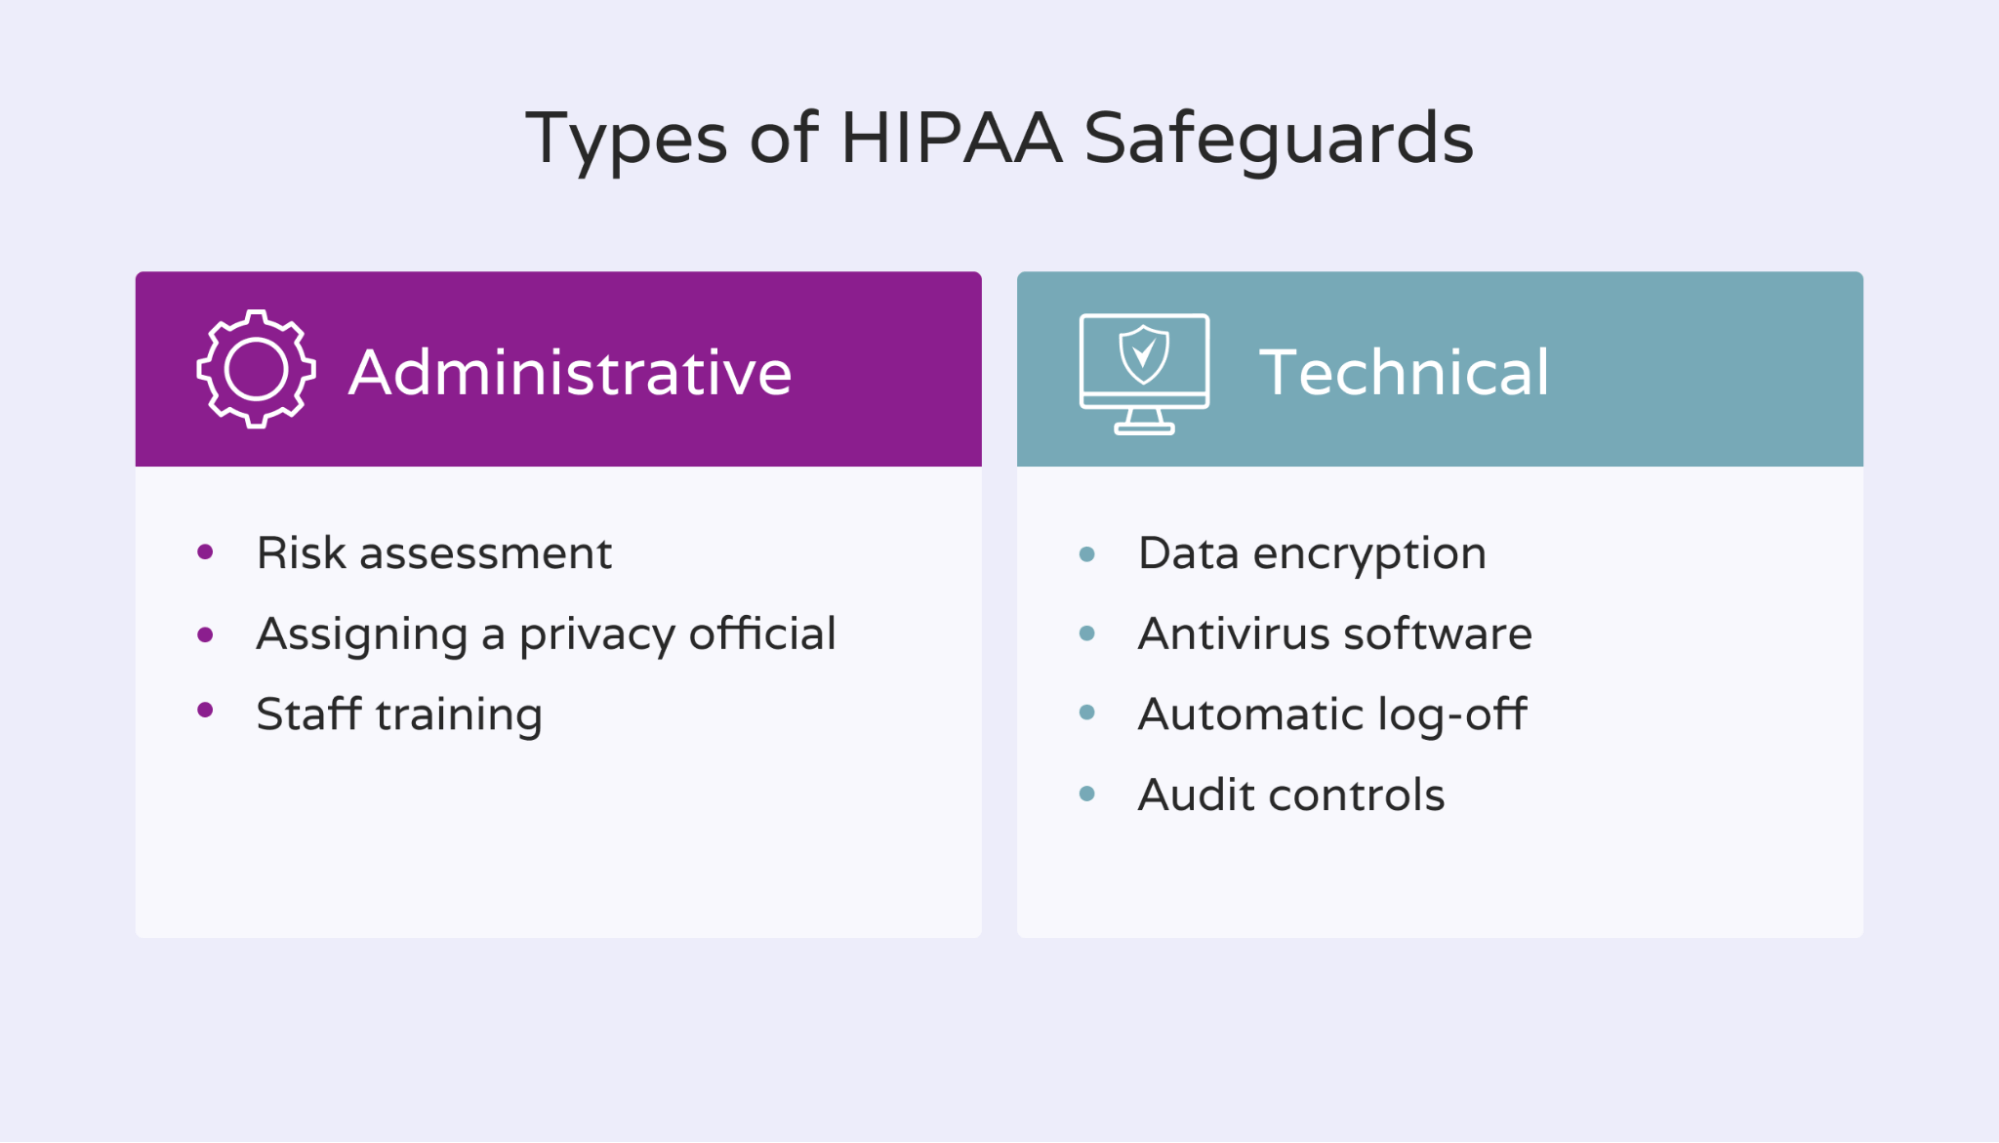 Types of HIPAA safeguards